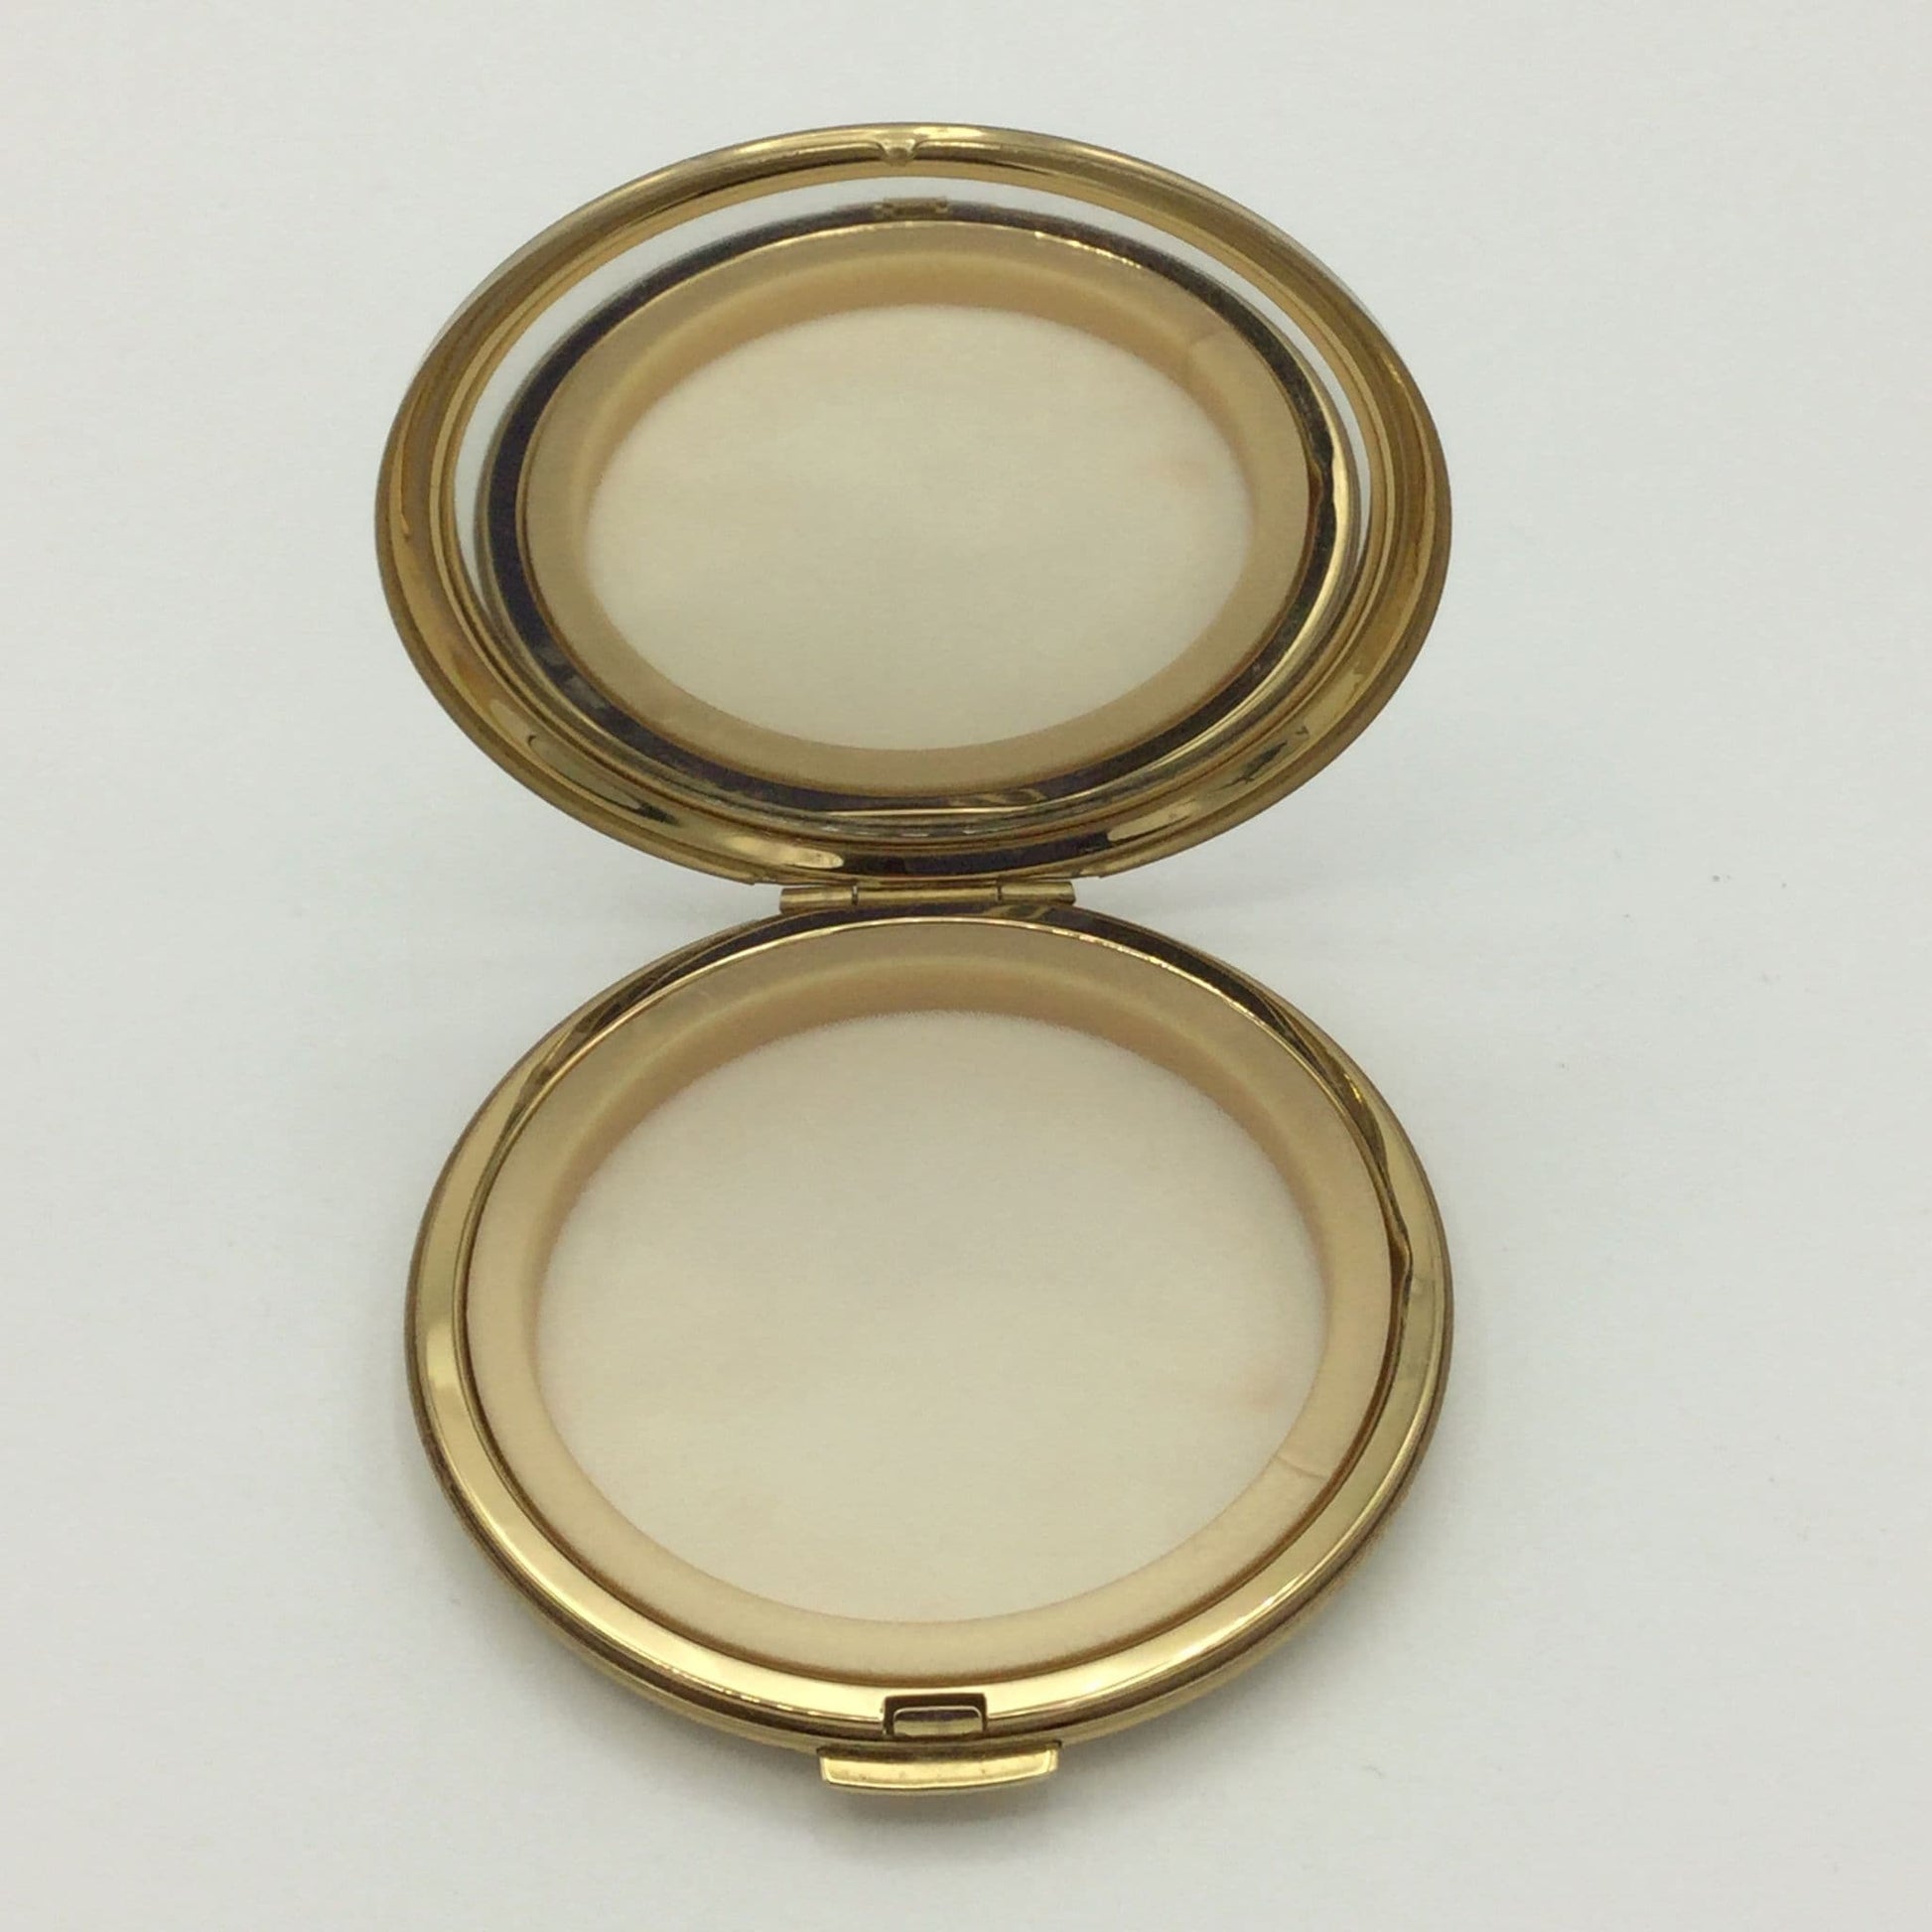 open Stratton compact showing a clear mirror and unsued powder screen